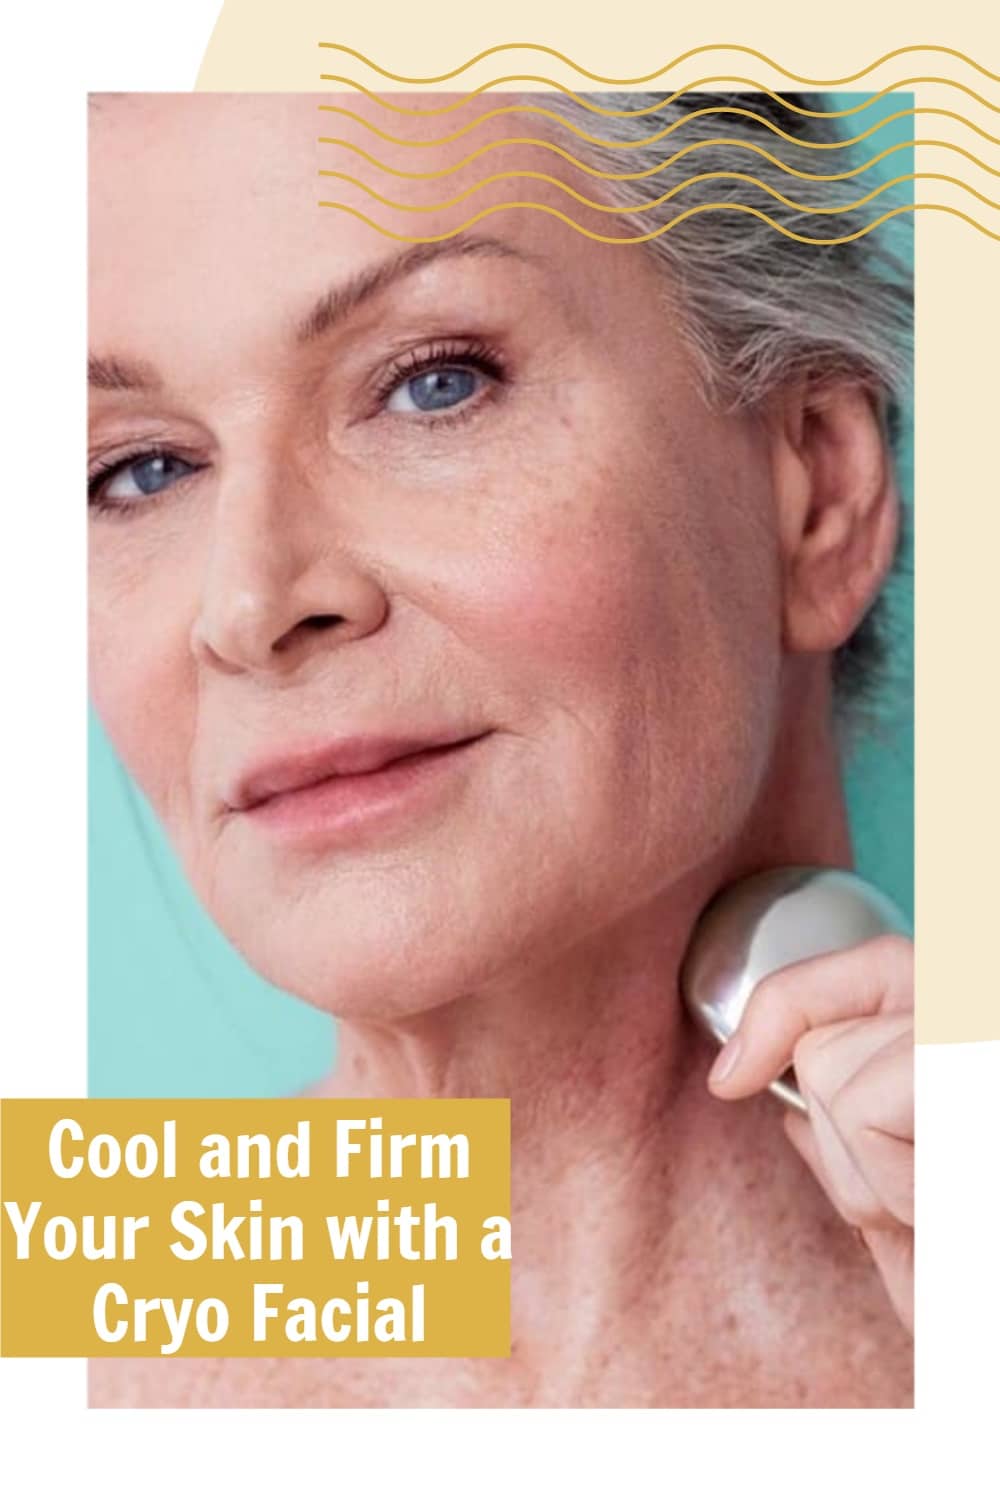 Cool-and-Firm-Your-Skin-with-a-Cryo-Facial